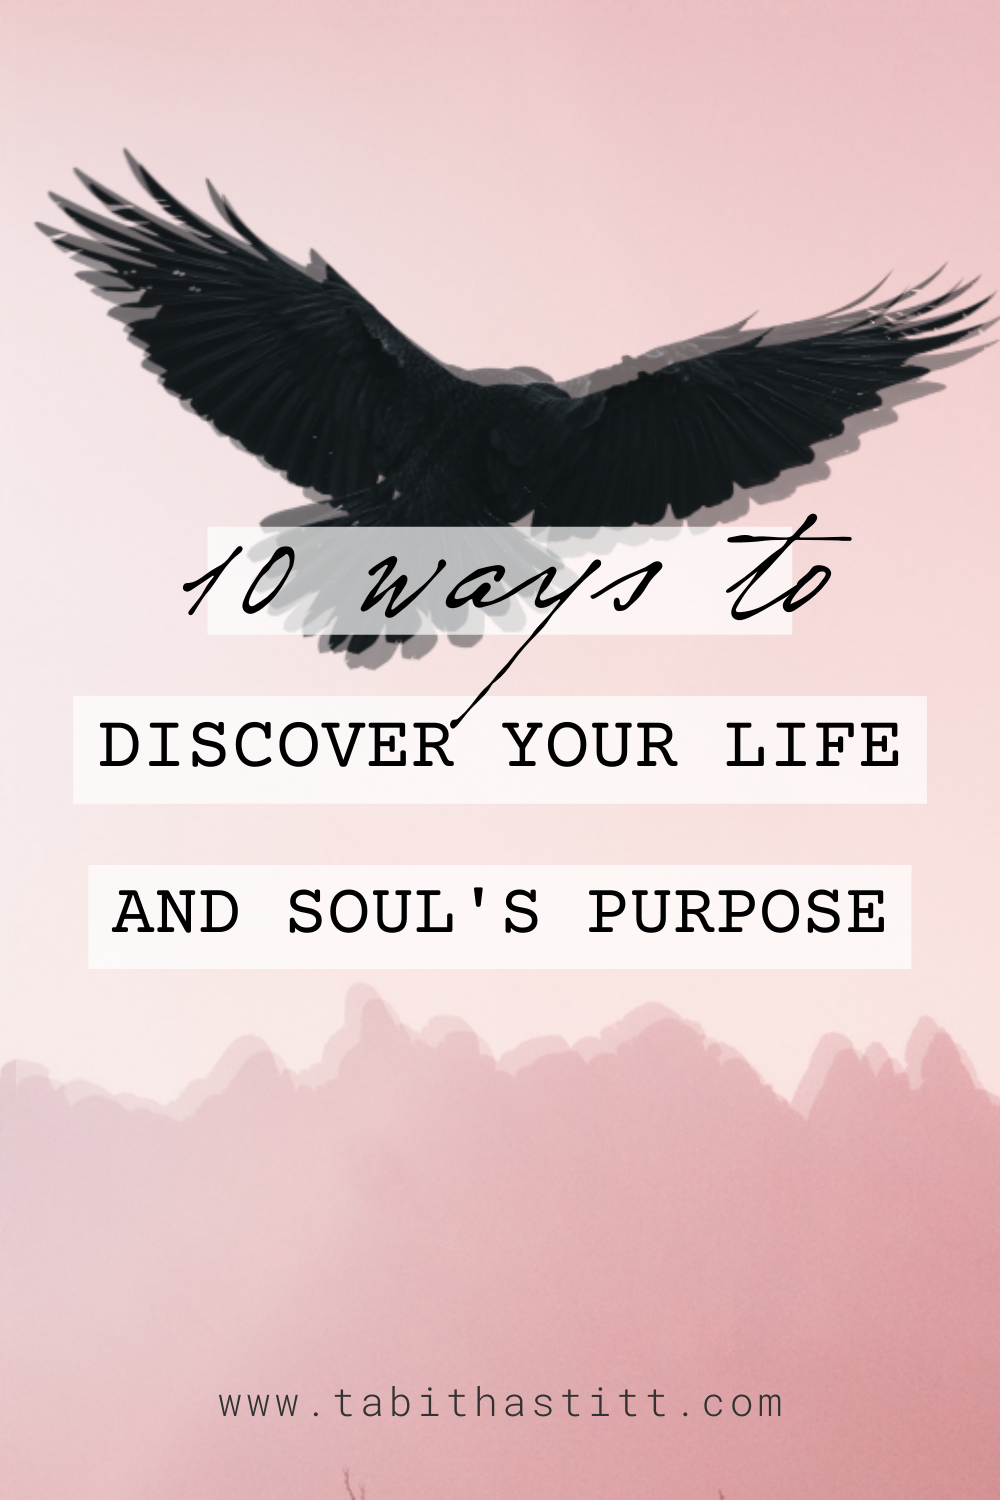 10 Ways to Discover Your Life and Soul's Purpose